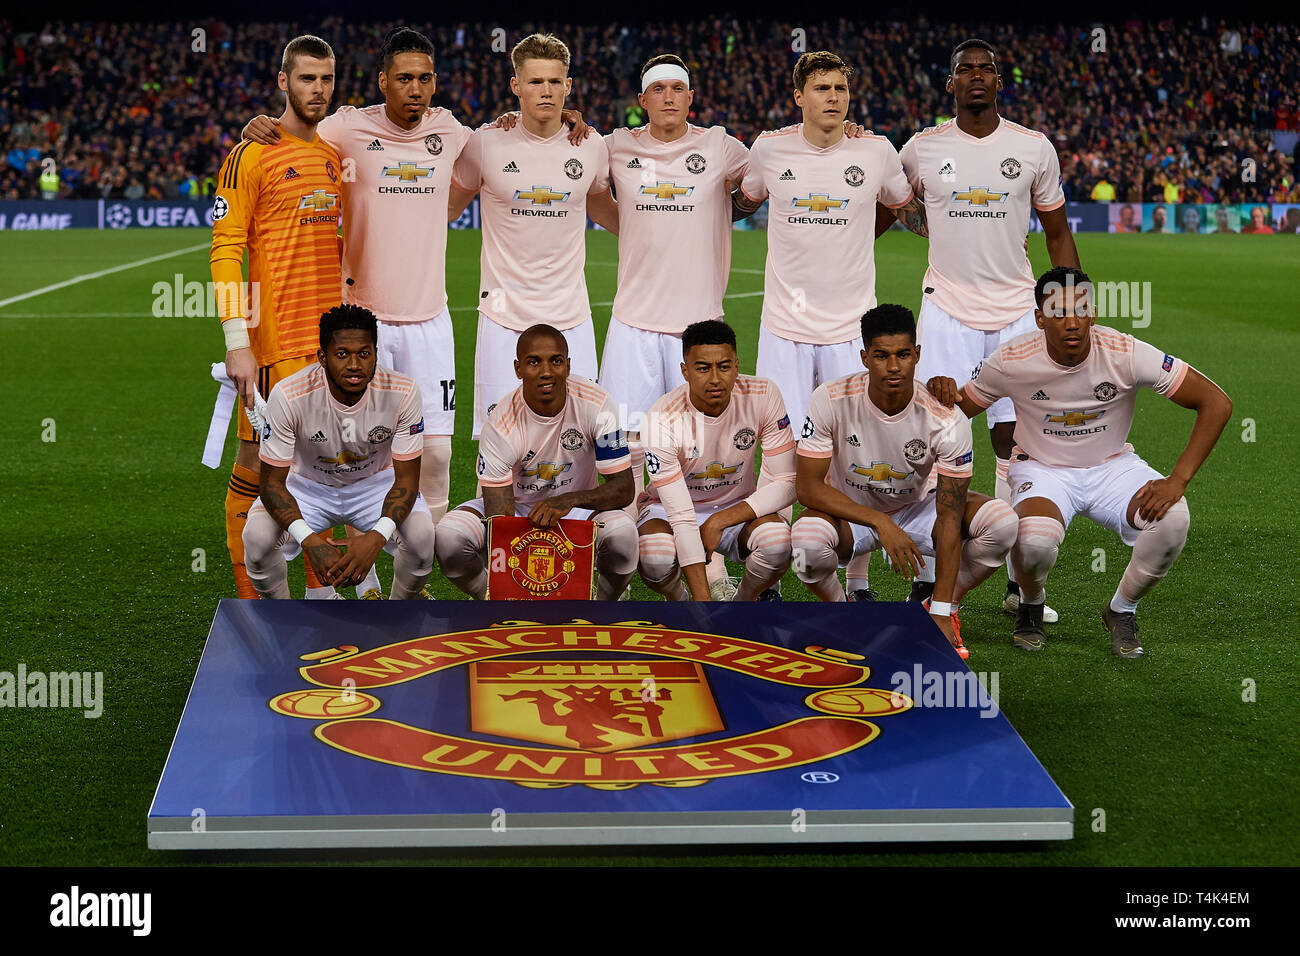 BARCELONA, SPAIN - APRIL 16: Manchester United line up prior to the UEFA Champions  League Quarter Final second leg match between FC Barcelona and Manchester  United at Camp Nou on April 16,